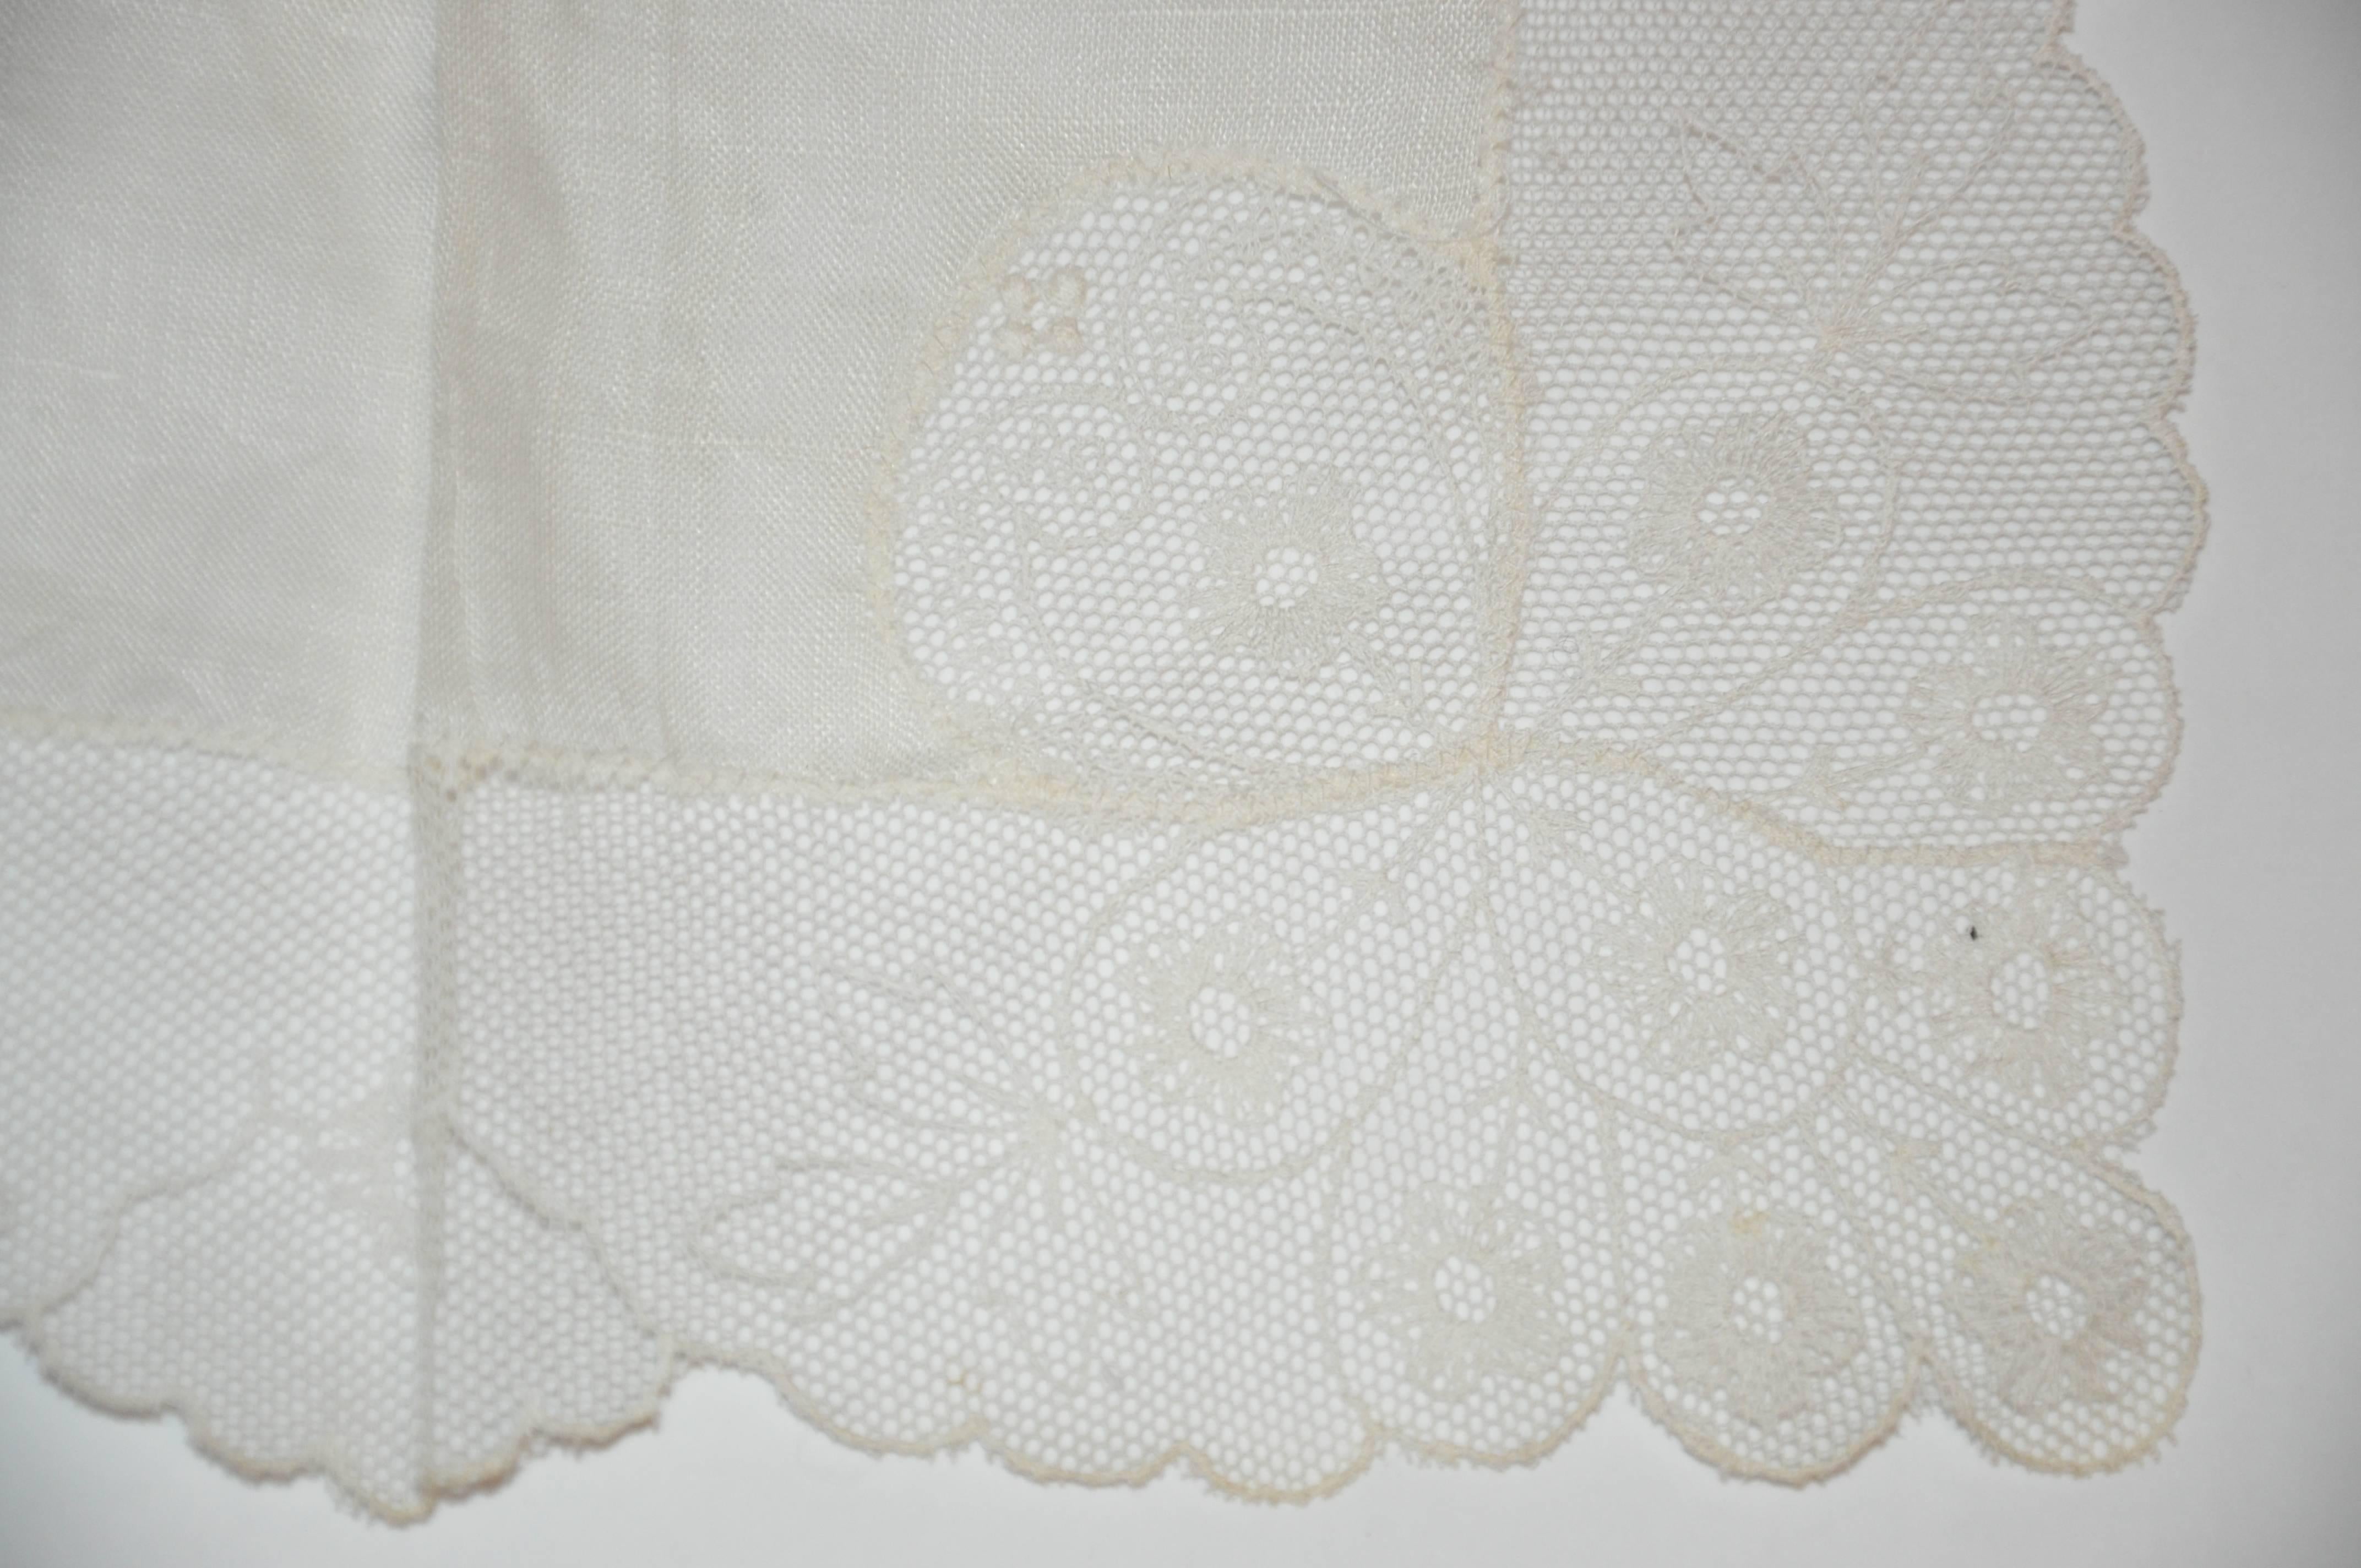 Austria's wonderful detailed 100% linen hand-knotted, hand-made lace handkerchief measures 10" x 10". Made in Austria.